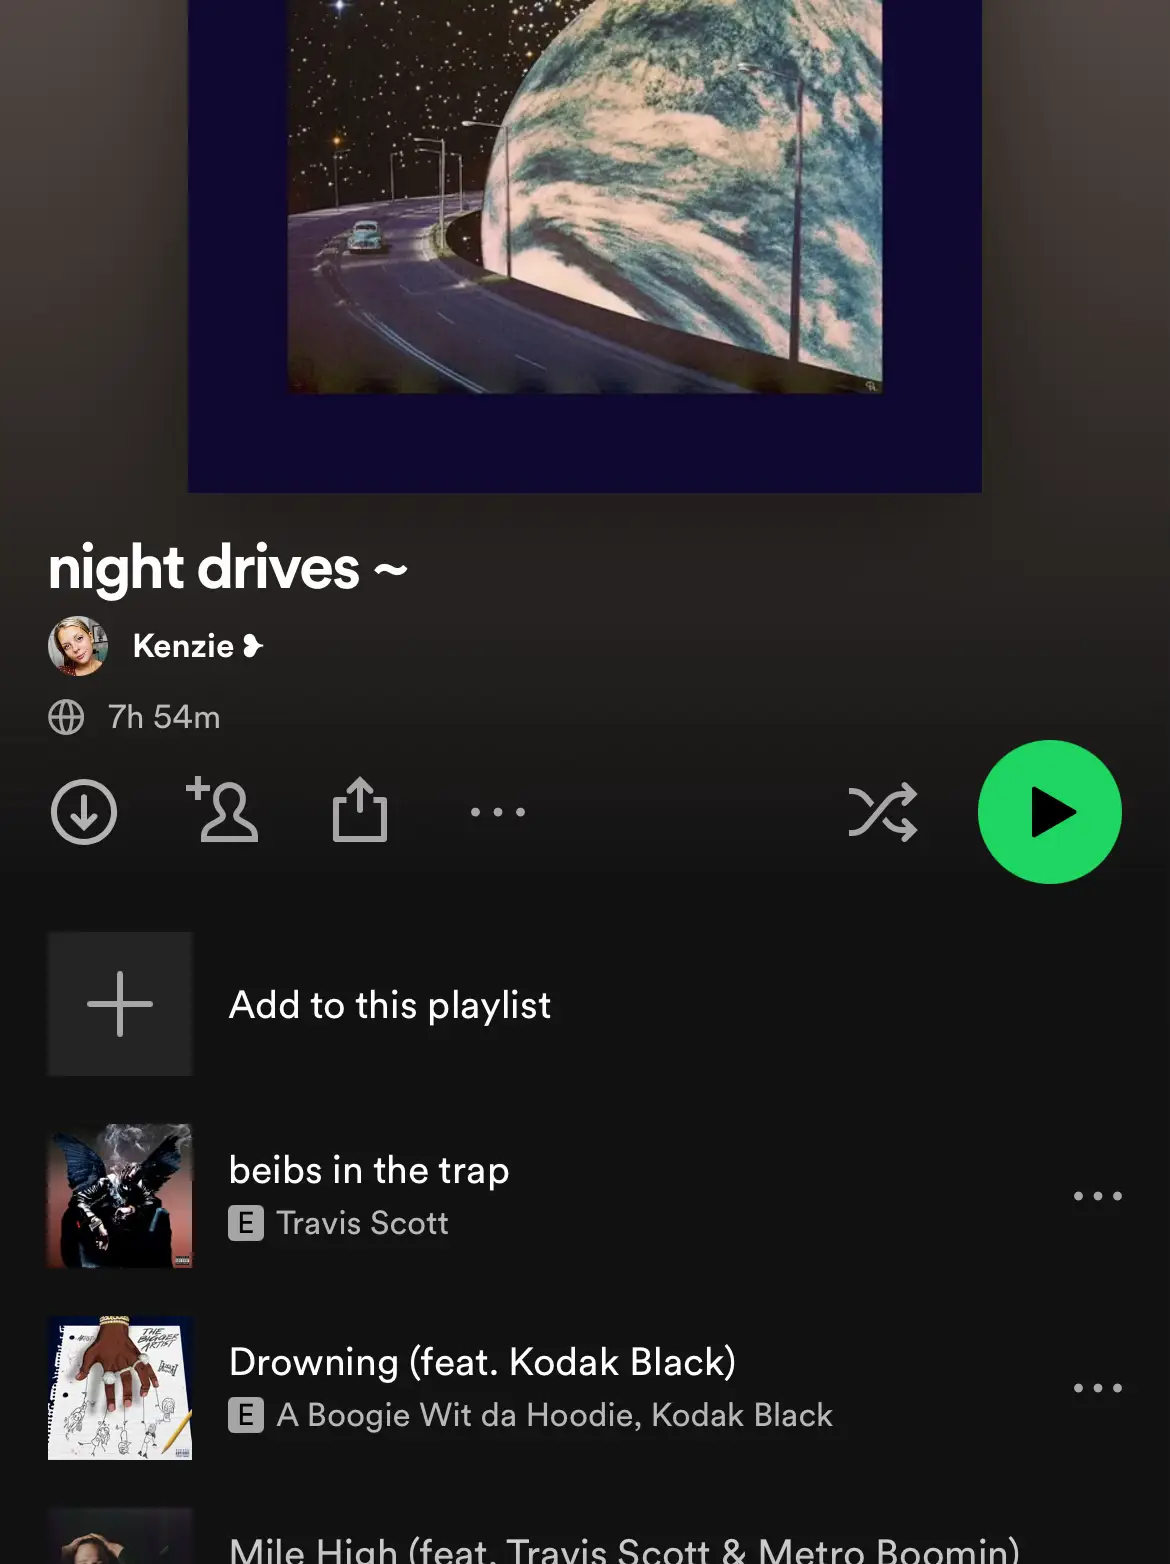  A playlist of music with a variety of songs including "Drowning" by Travis Scott and "Mile High" by Kodak Black.